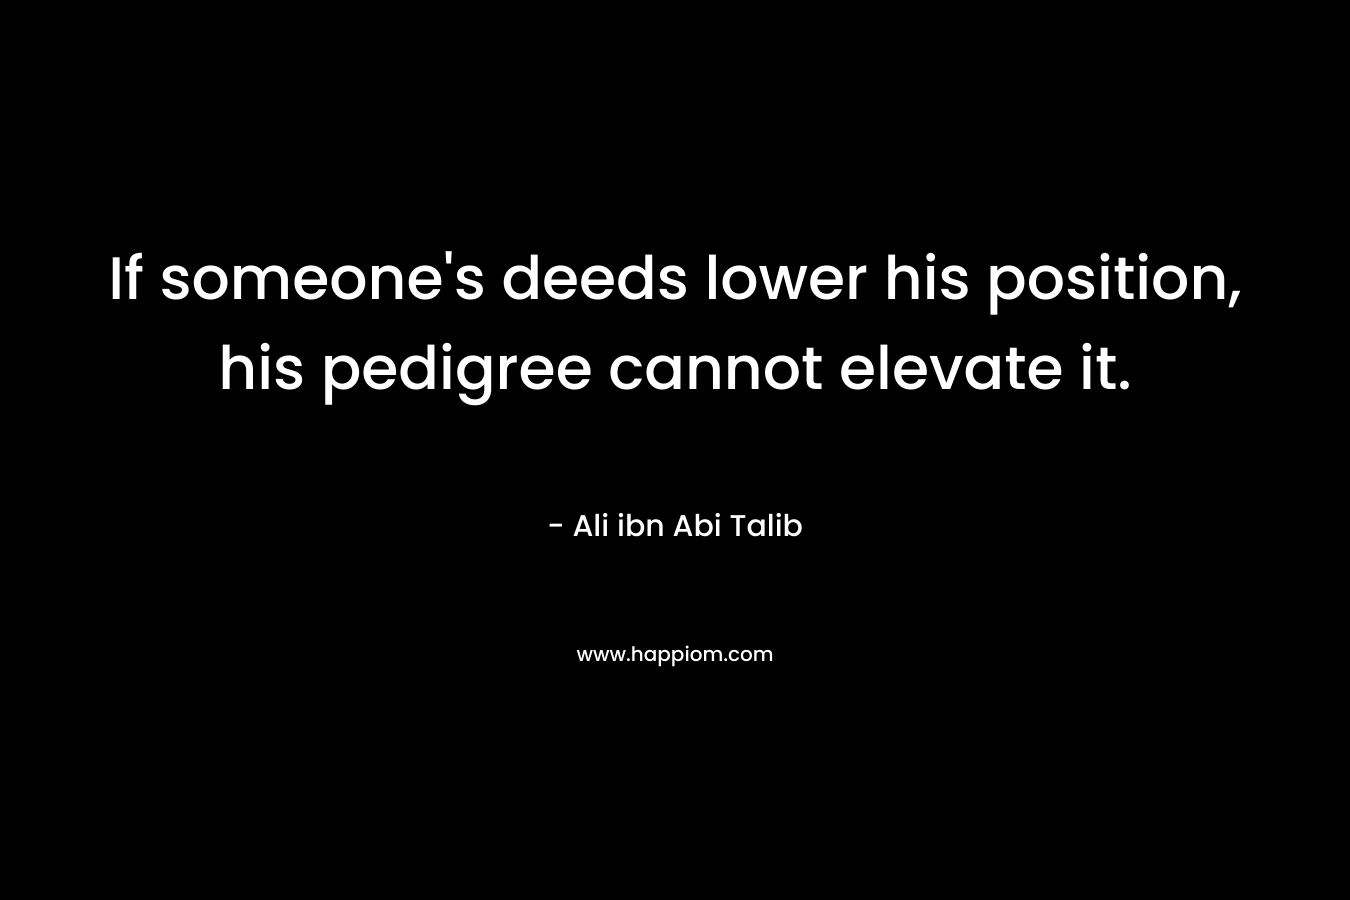 If someone's deeds lower his position, his pedigree cannot elevate it.